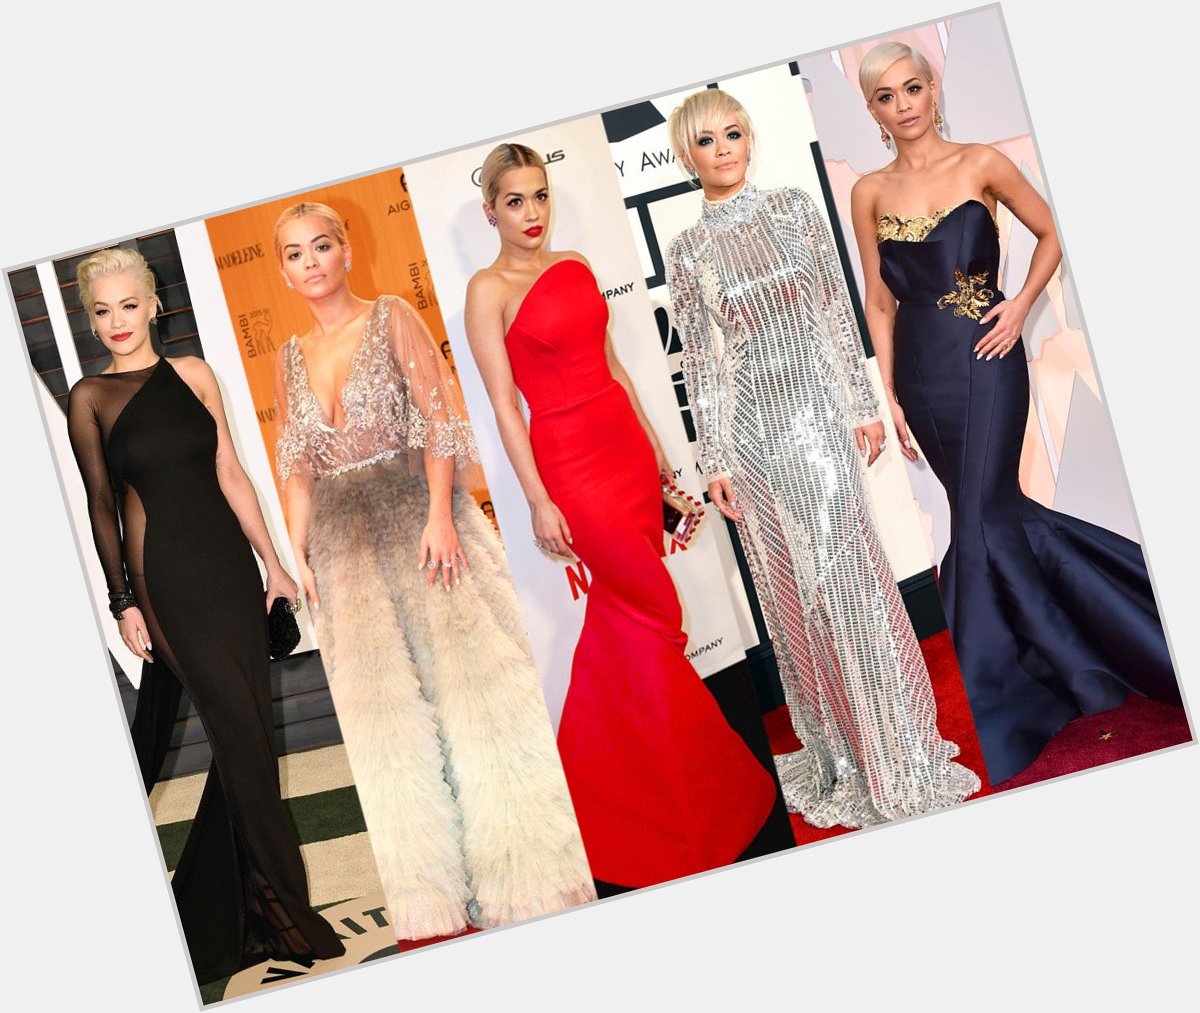  25th Birthday, Rita Ora! Check Out Her Many Unforgettable ...   